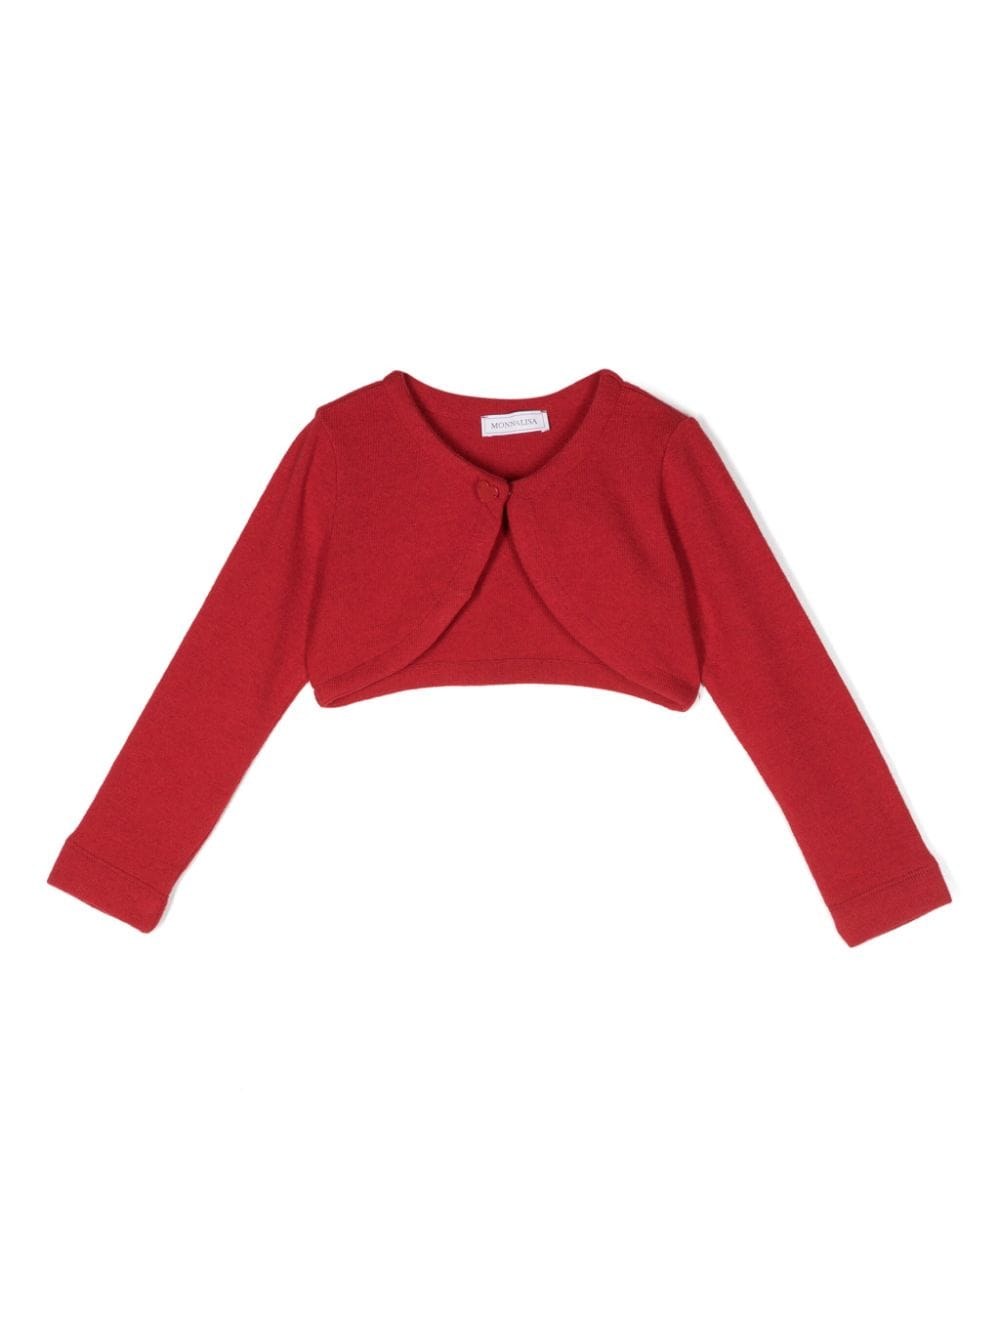 Red cardigan for girls